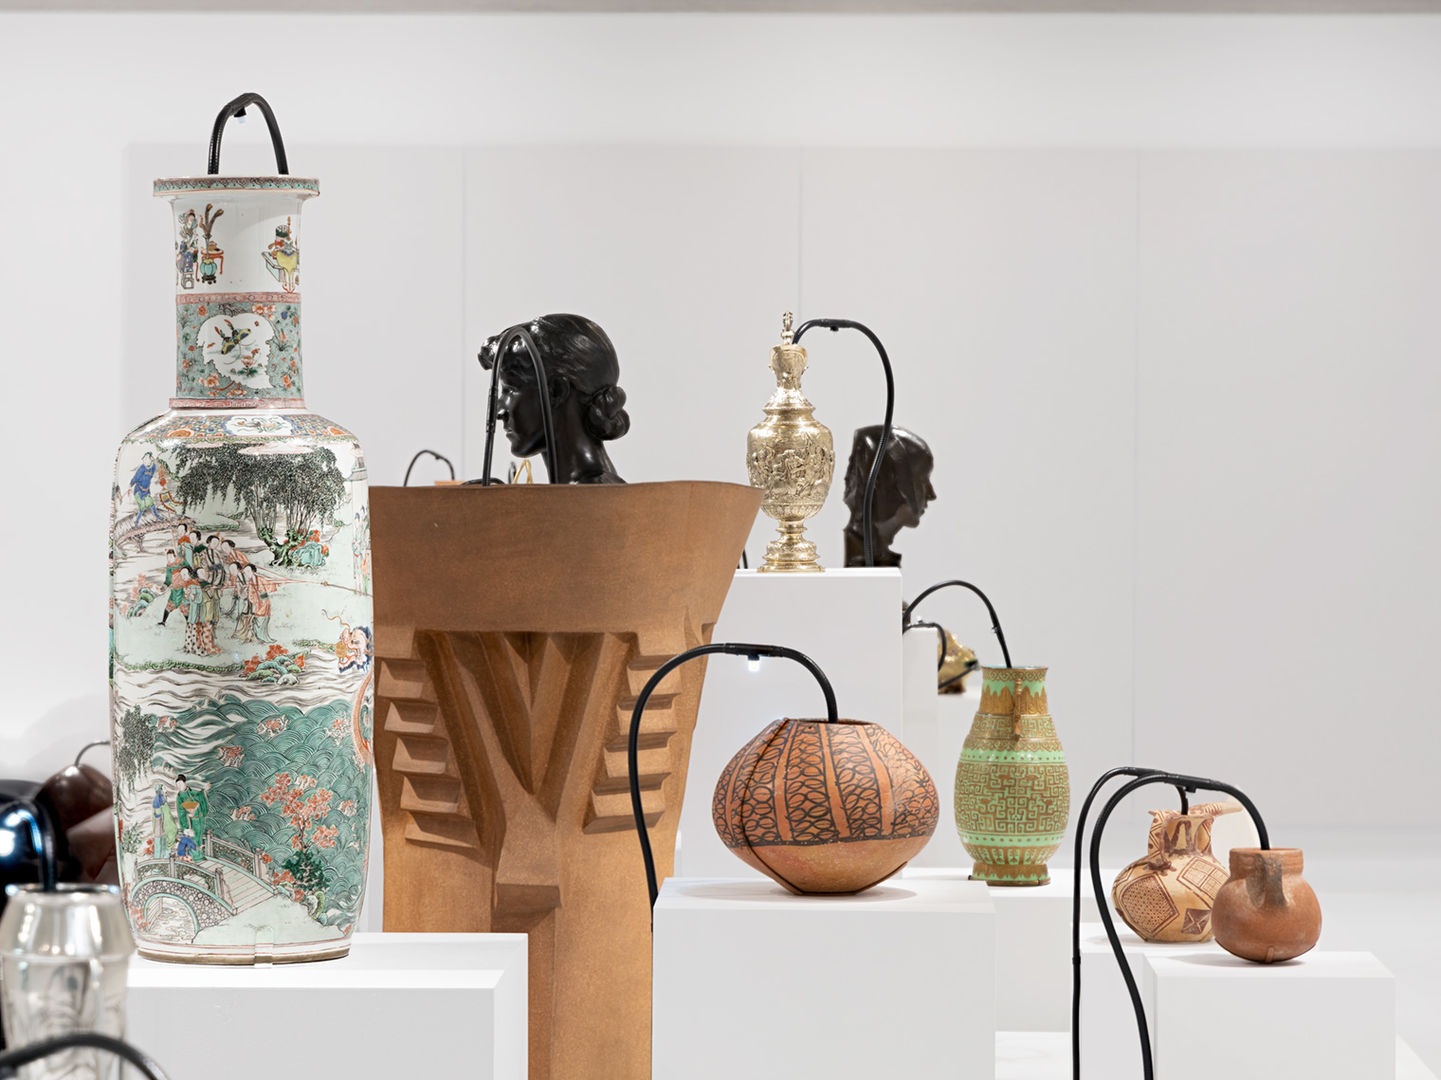 Gallery view of Oliver Beer Vessel Orchestra exhibition featuring different vessels from the museum.